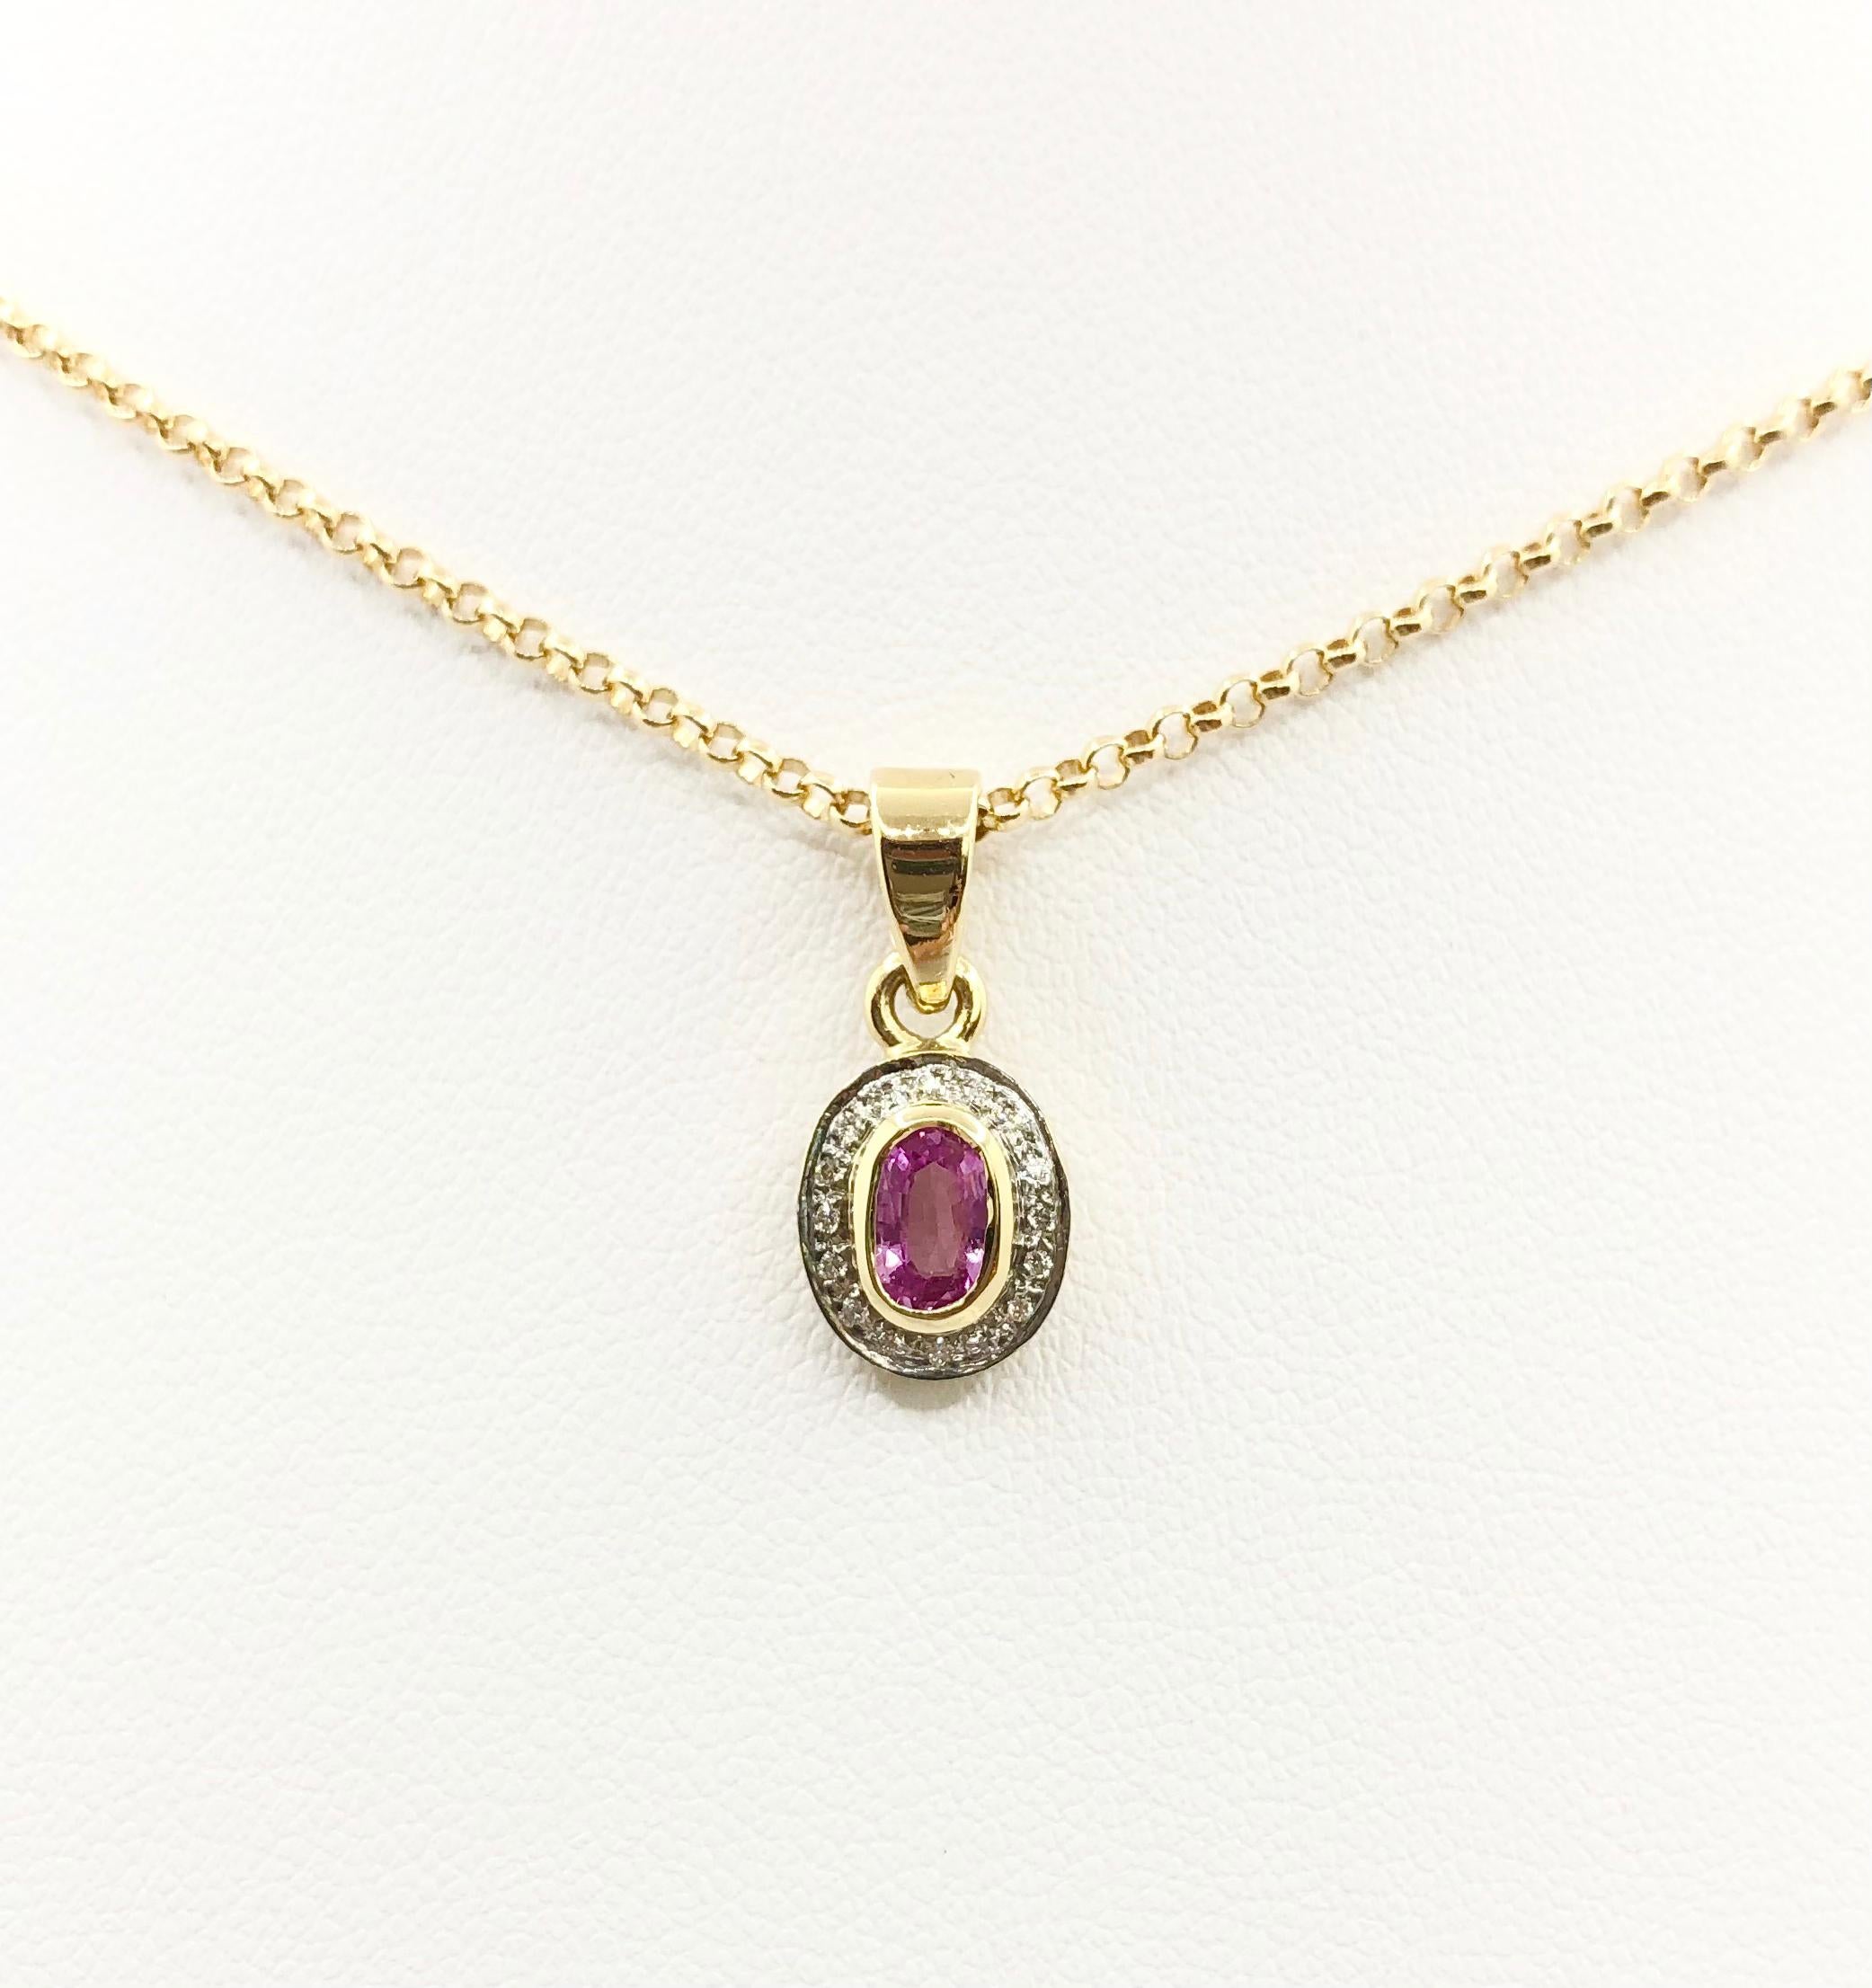 Pink Sapphire 0.50 carat with Diamond 0.06 carat Pendant set in 18 Karat Gold Settings
(chain not included)

Width: 0.9 cm 
Length: 1.9 cm
Total Weight: 1.68 grams

